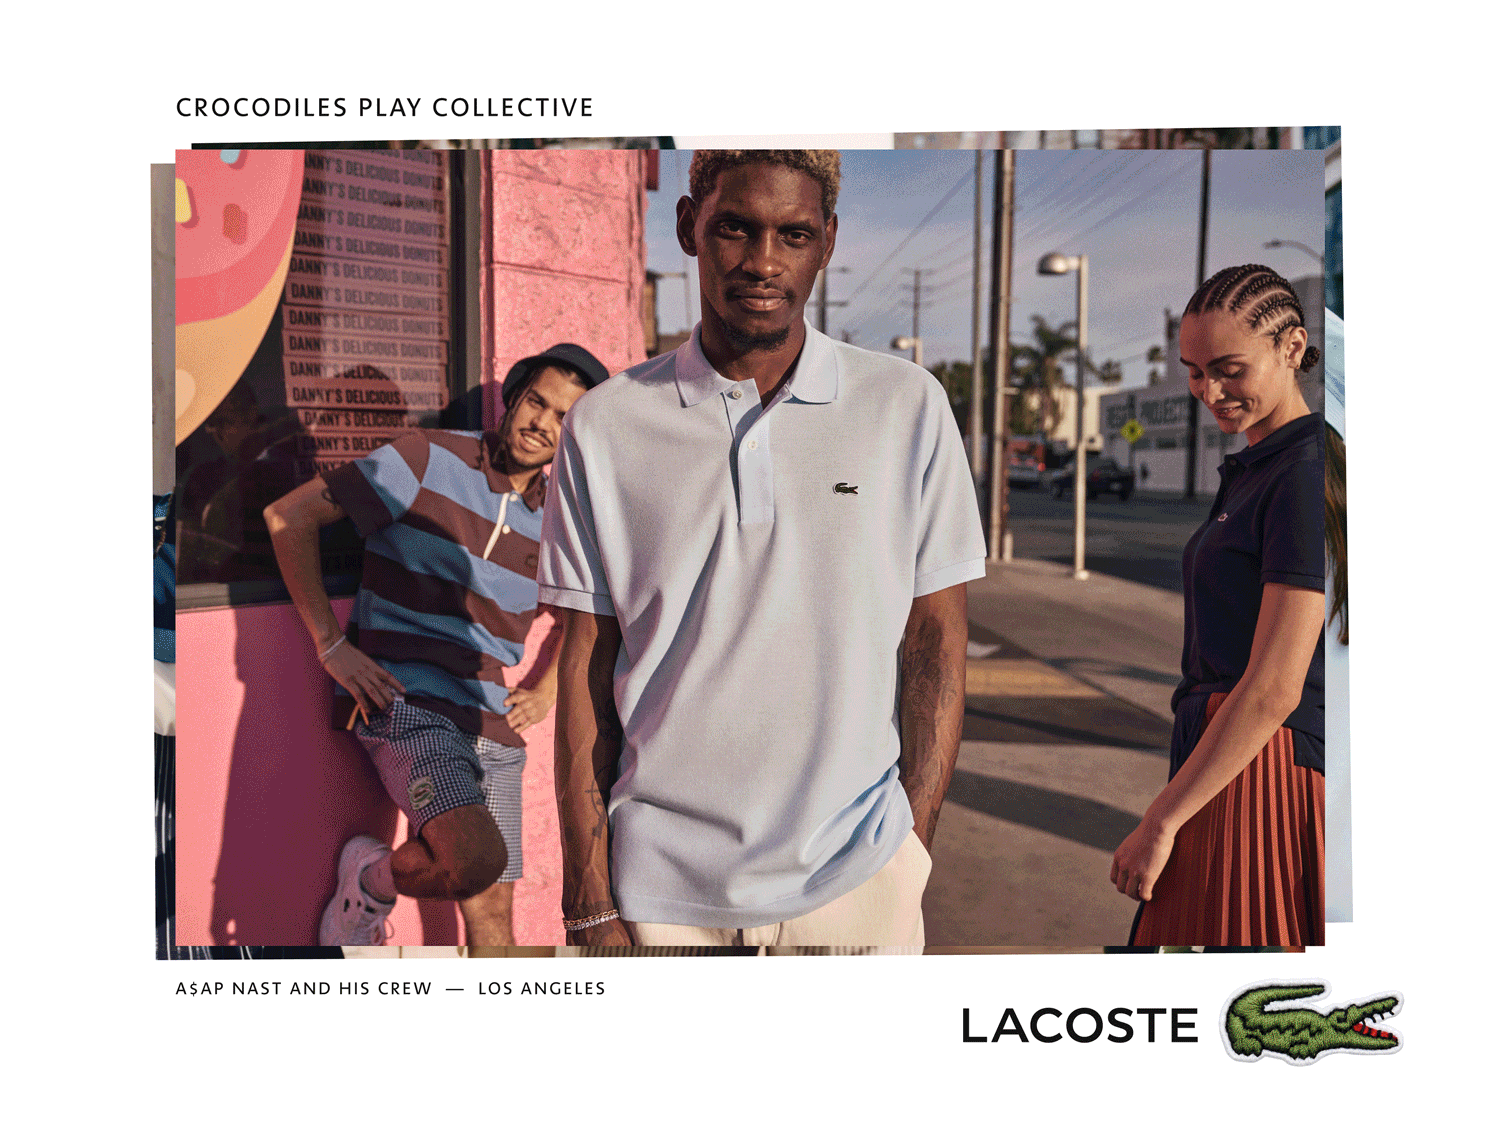 Lacoste Assembles the Crocodiles Play Collective for Ambassador Campaign